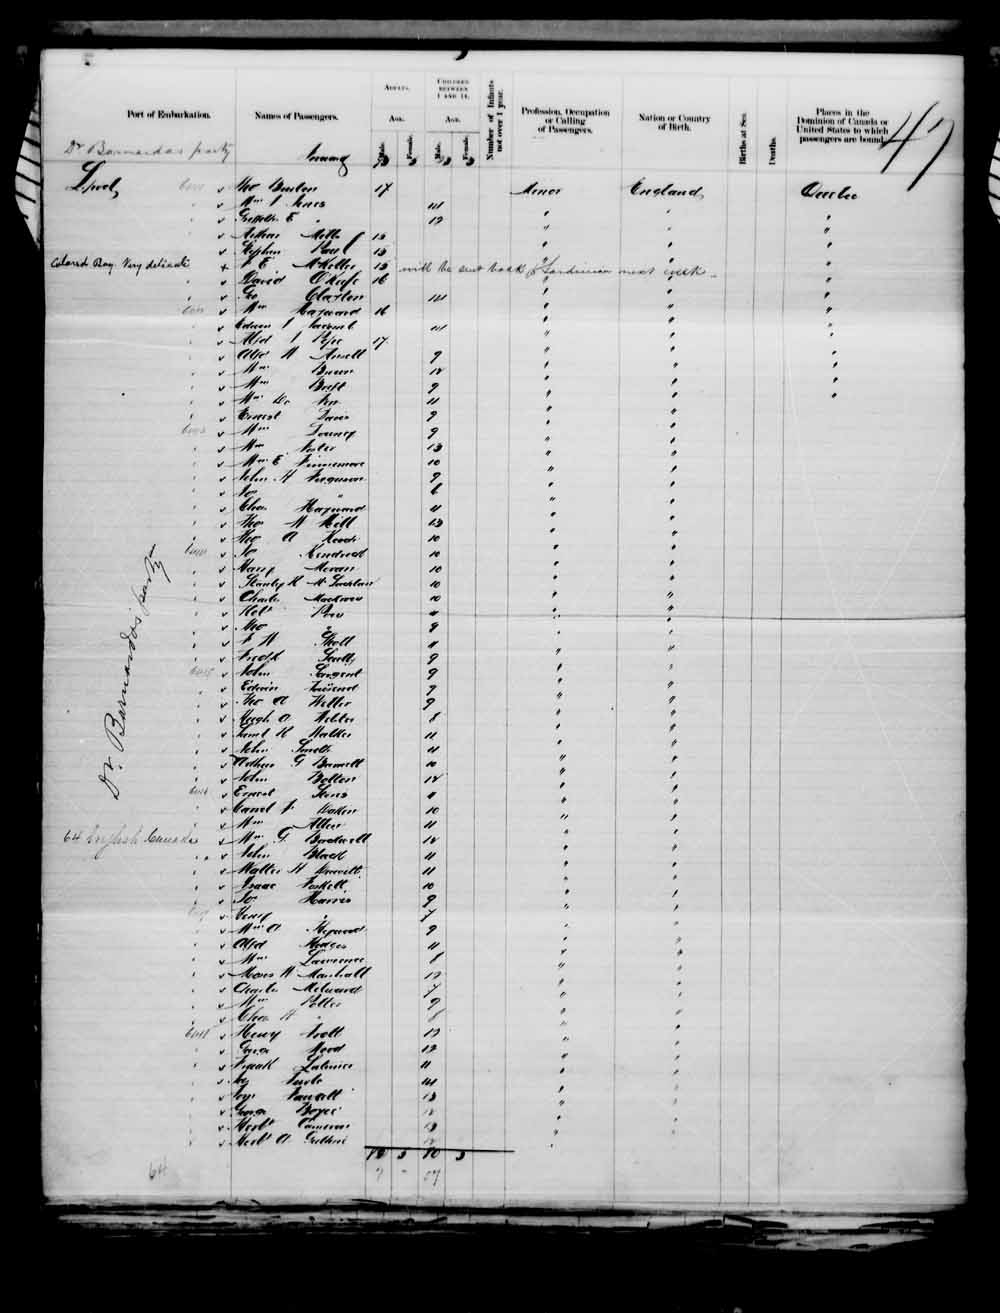 Digitized page of Quebec Passenger Lists for Image No.: e003552797